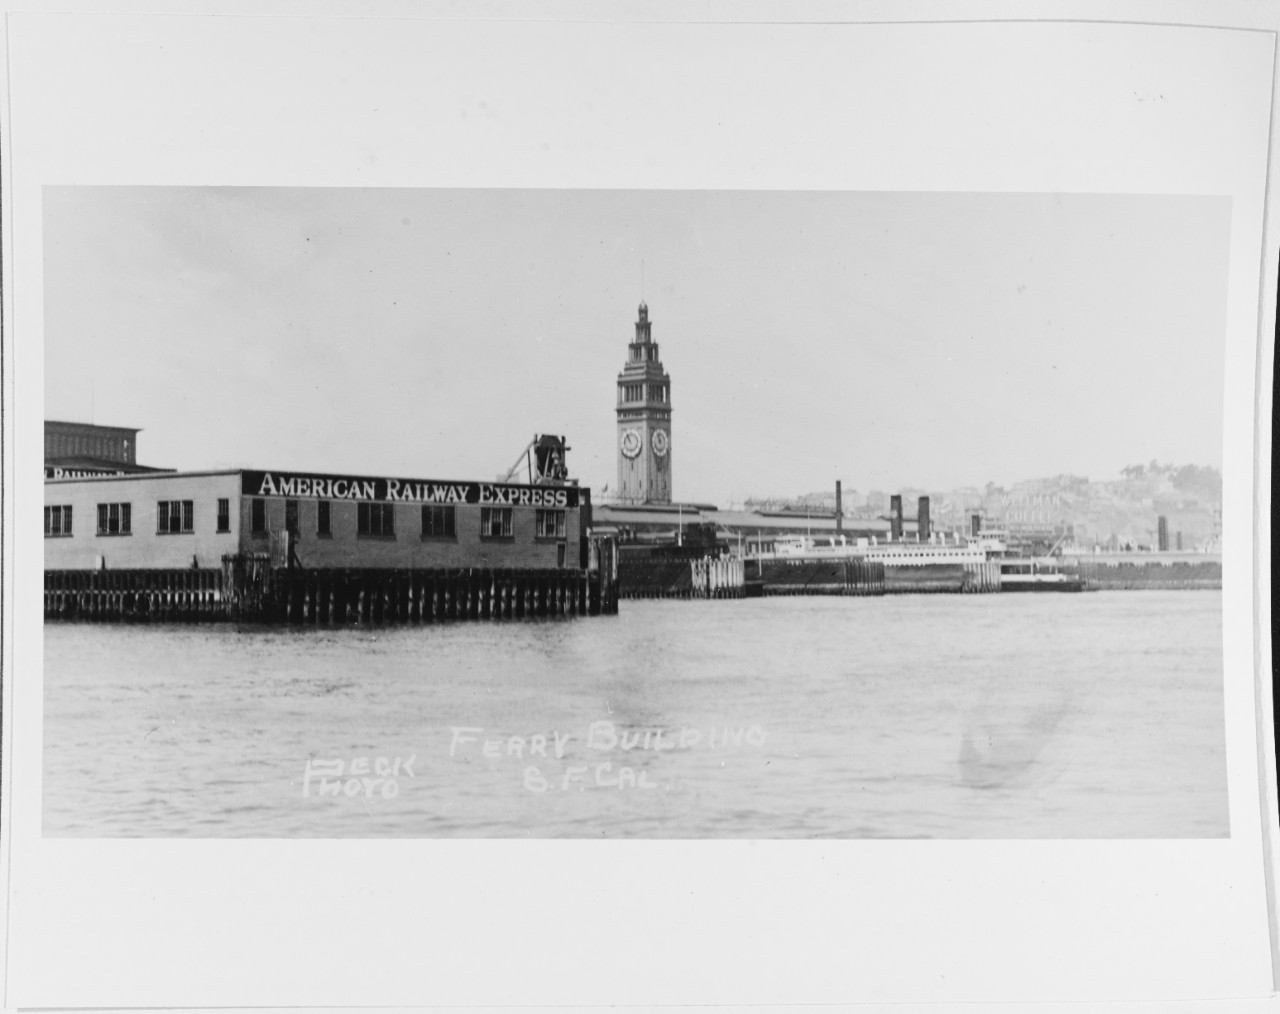 The ferry building in San Francisco, California. Some